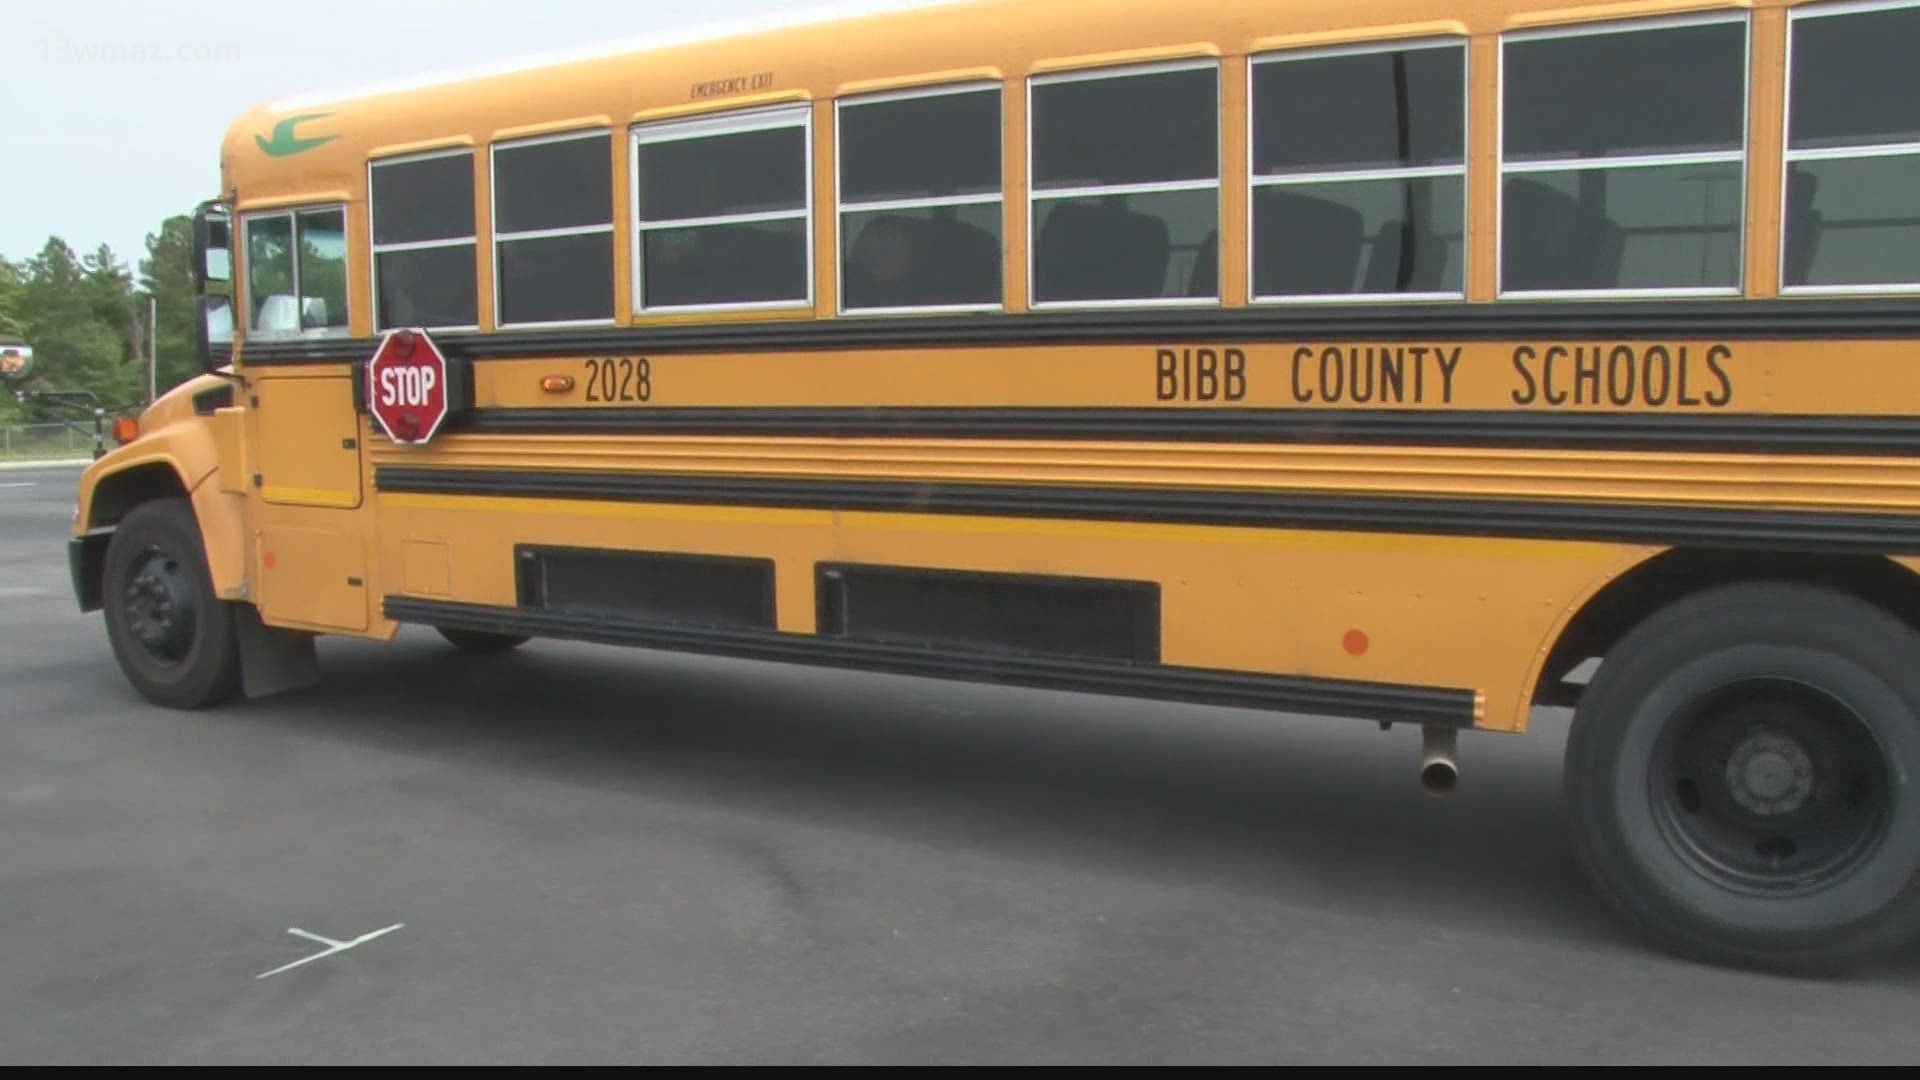 Bibb County Schools has put together a plan to pay out rewards to solve their driver shortage.